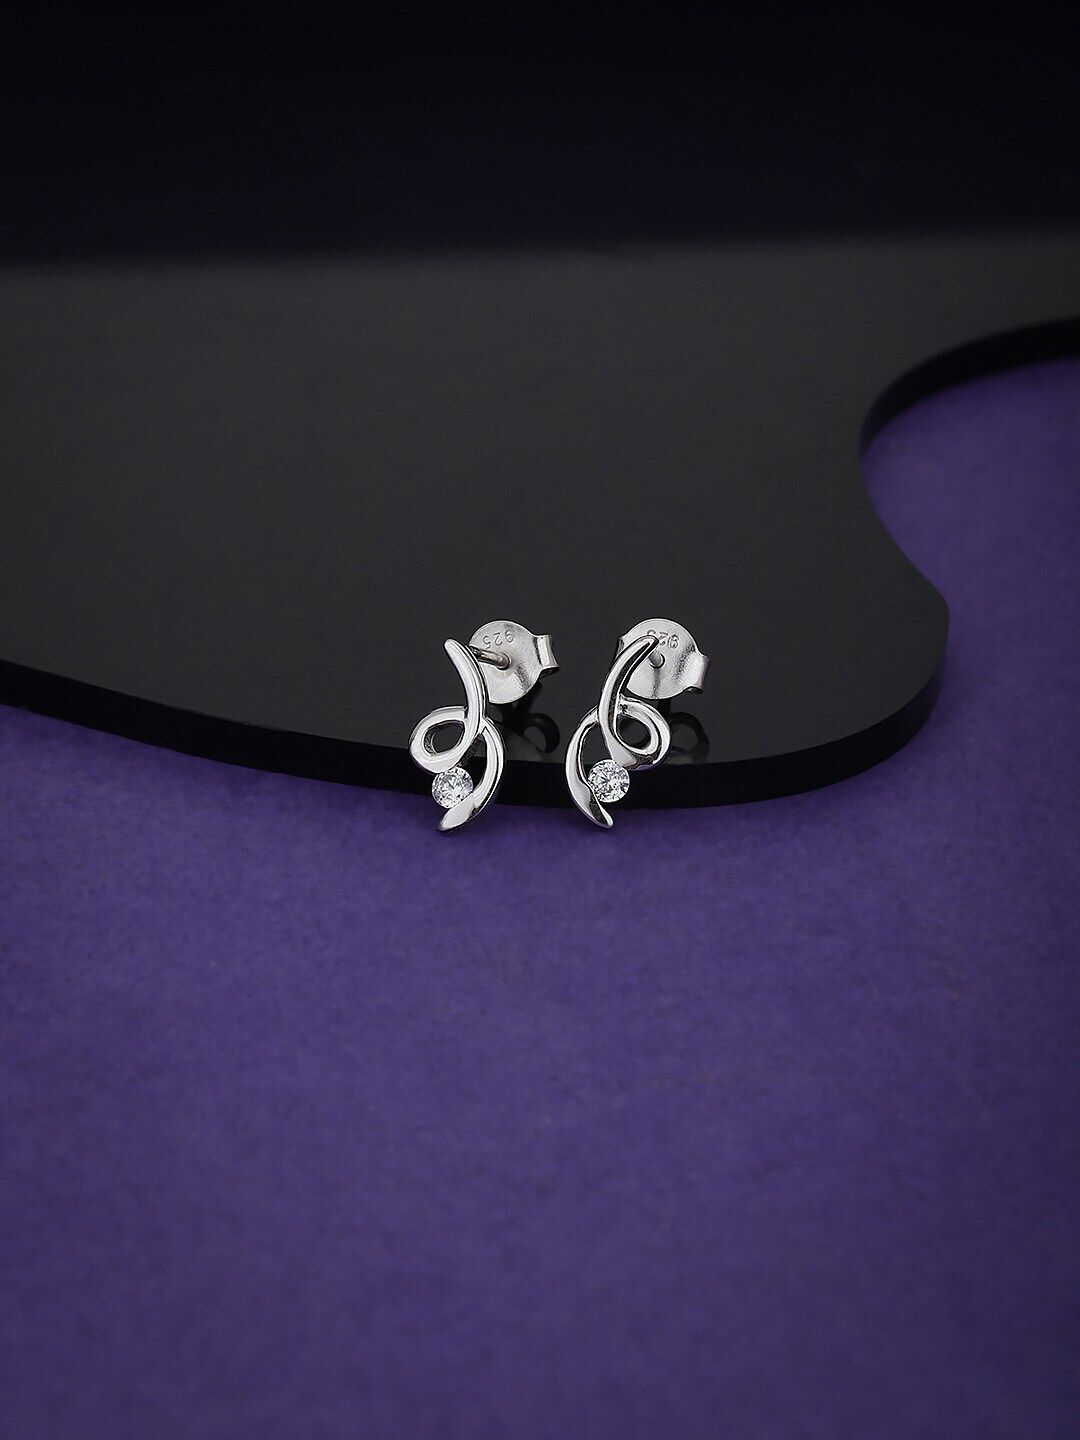 VANBELLE 925 Sterling Silver Contemporary Studs Earrings Price in India